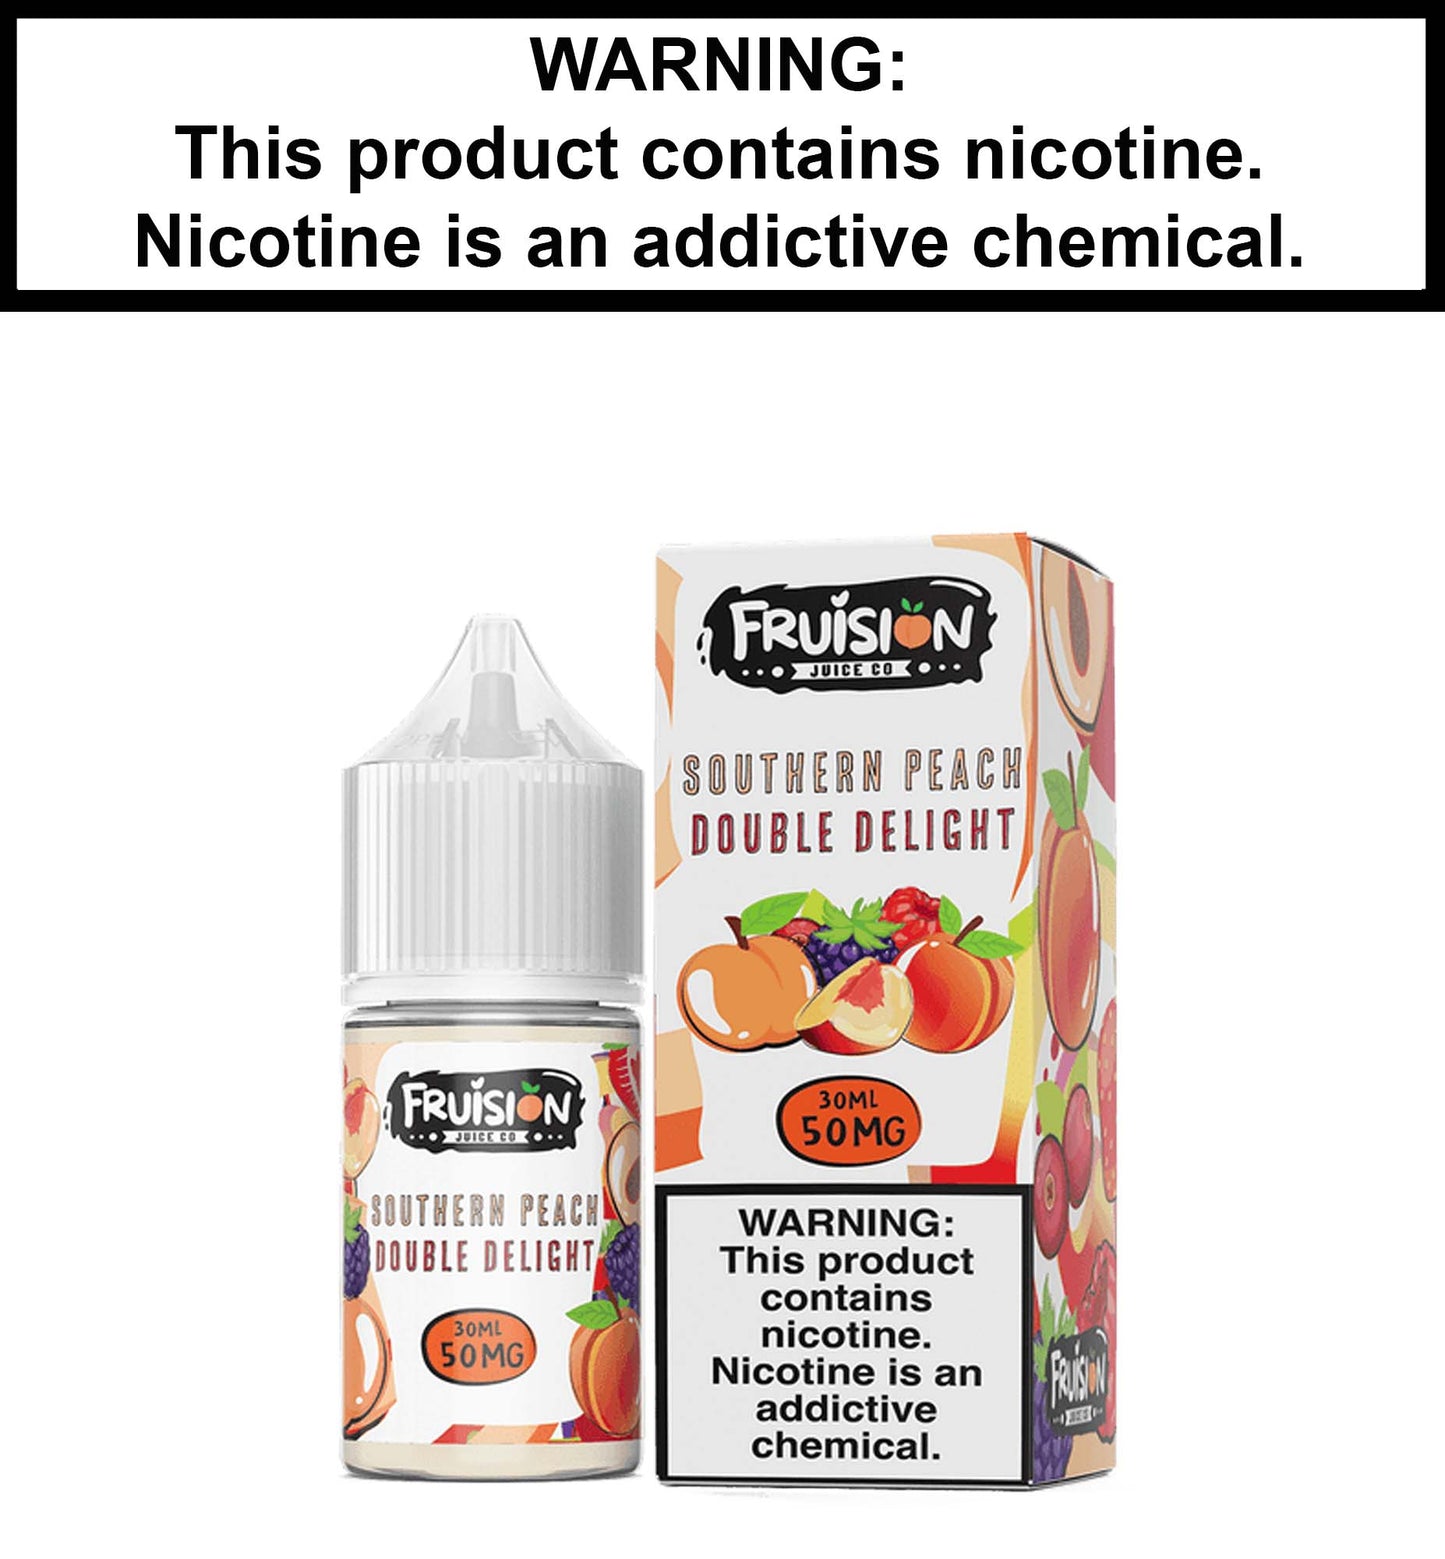 Fruision Southern Peach Double Delight (Clearance)